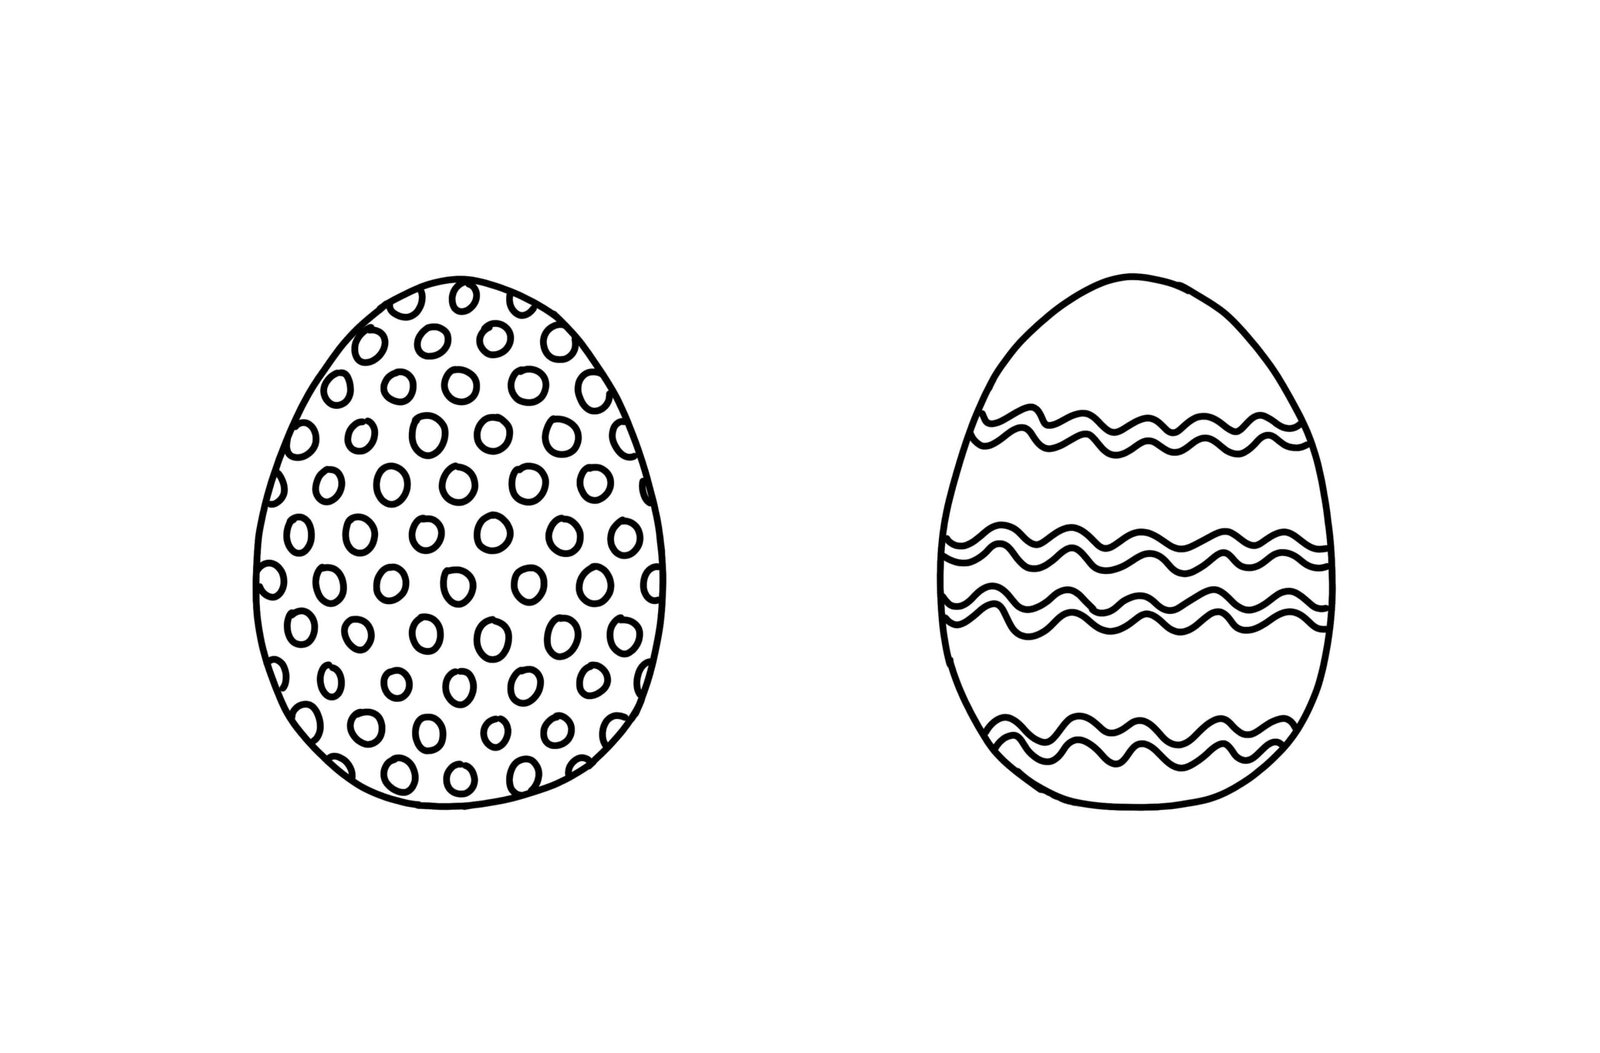 Easter Egg Patterns Coloring Page